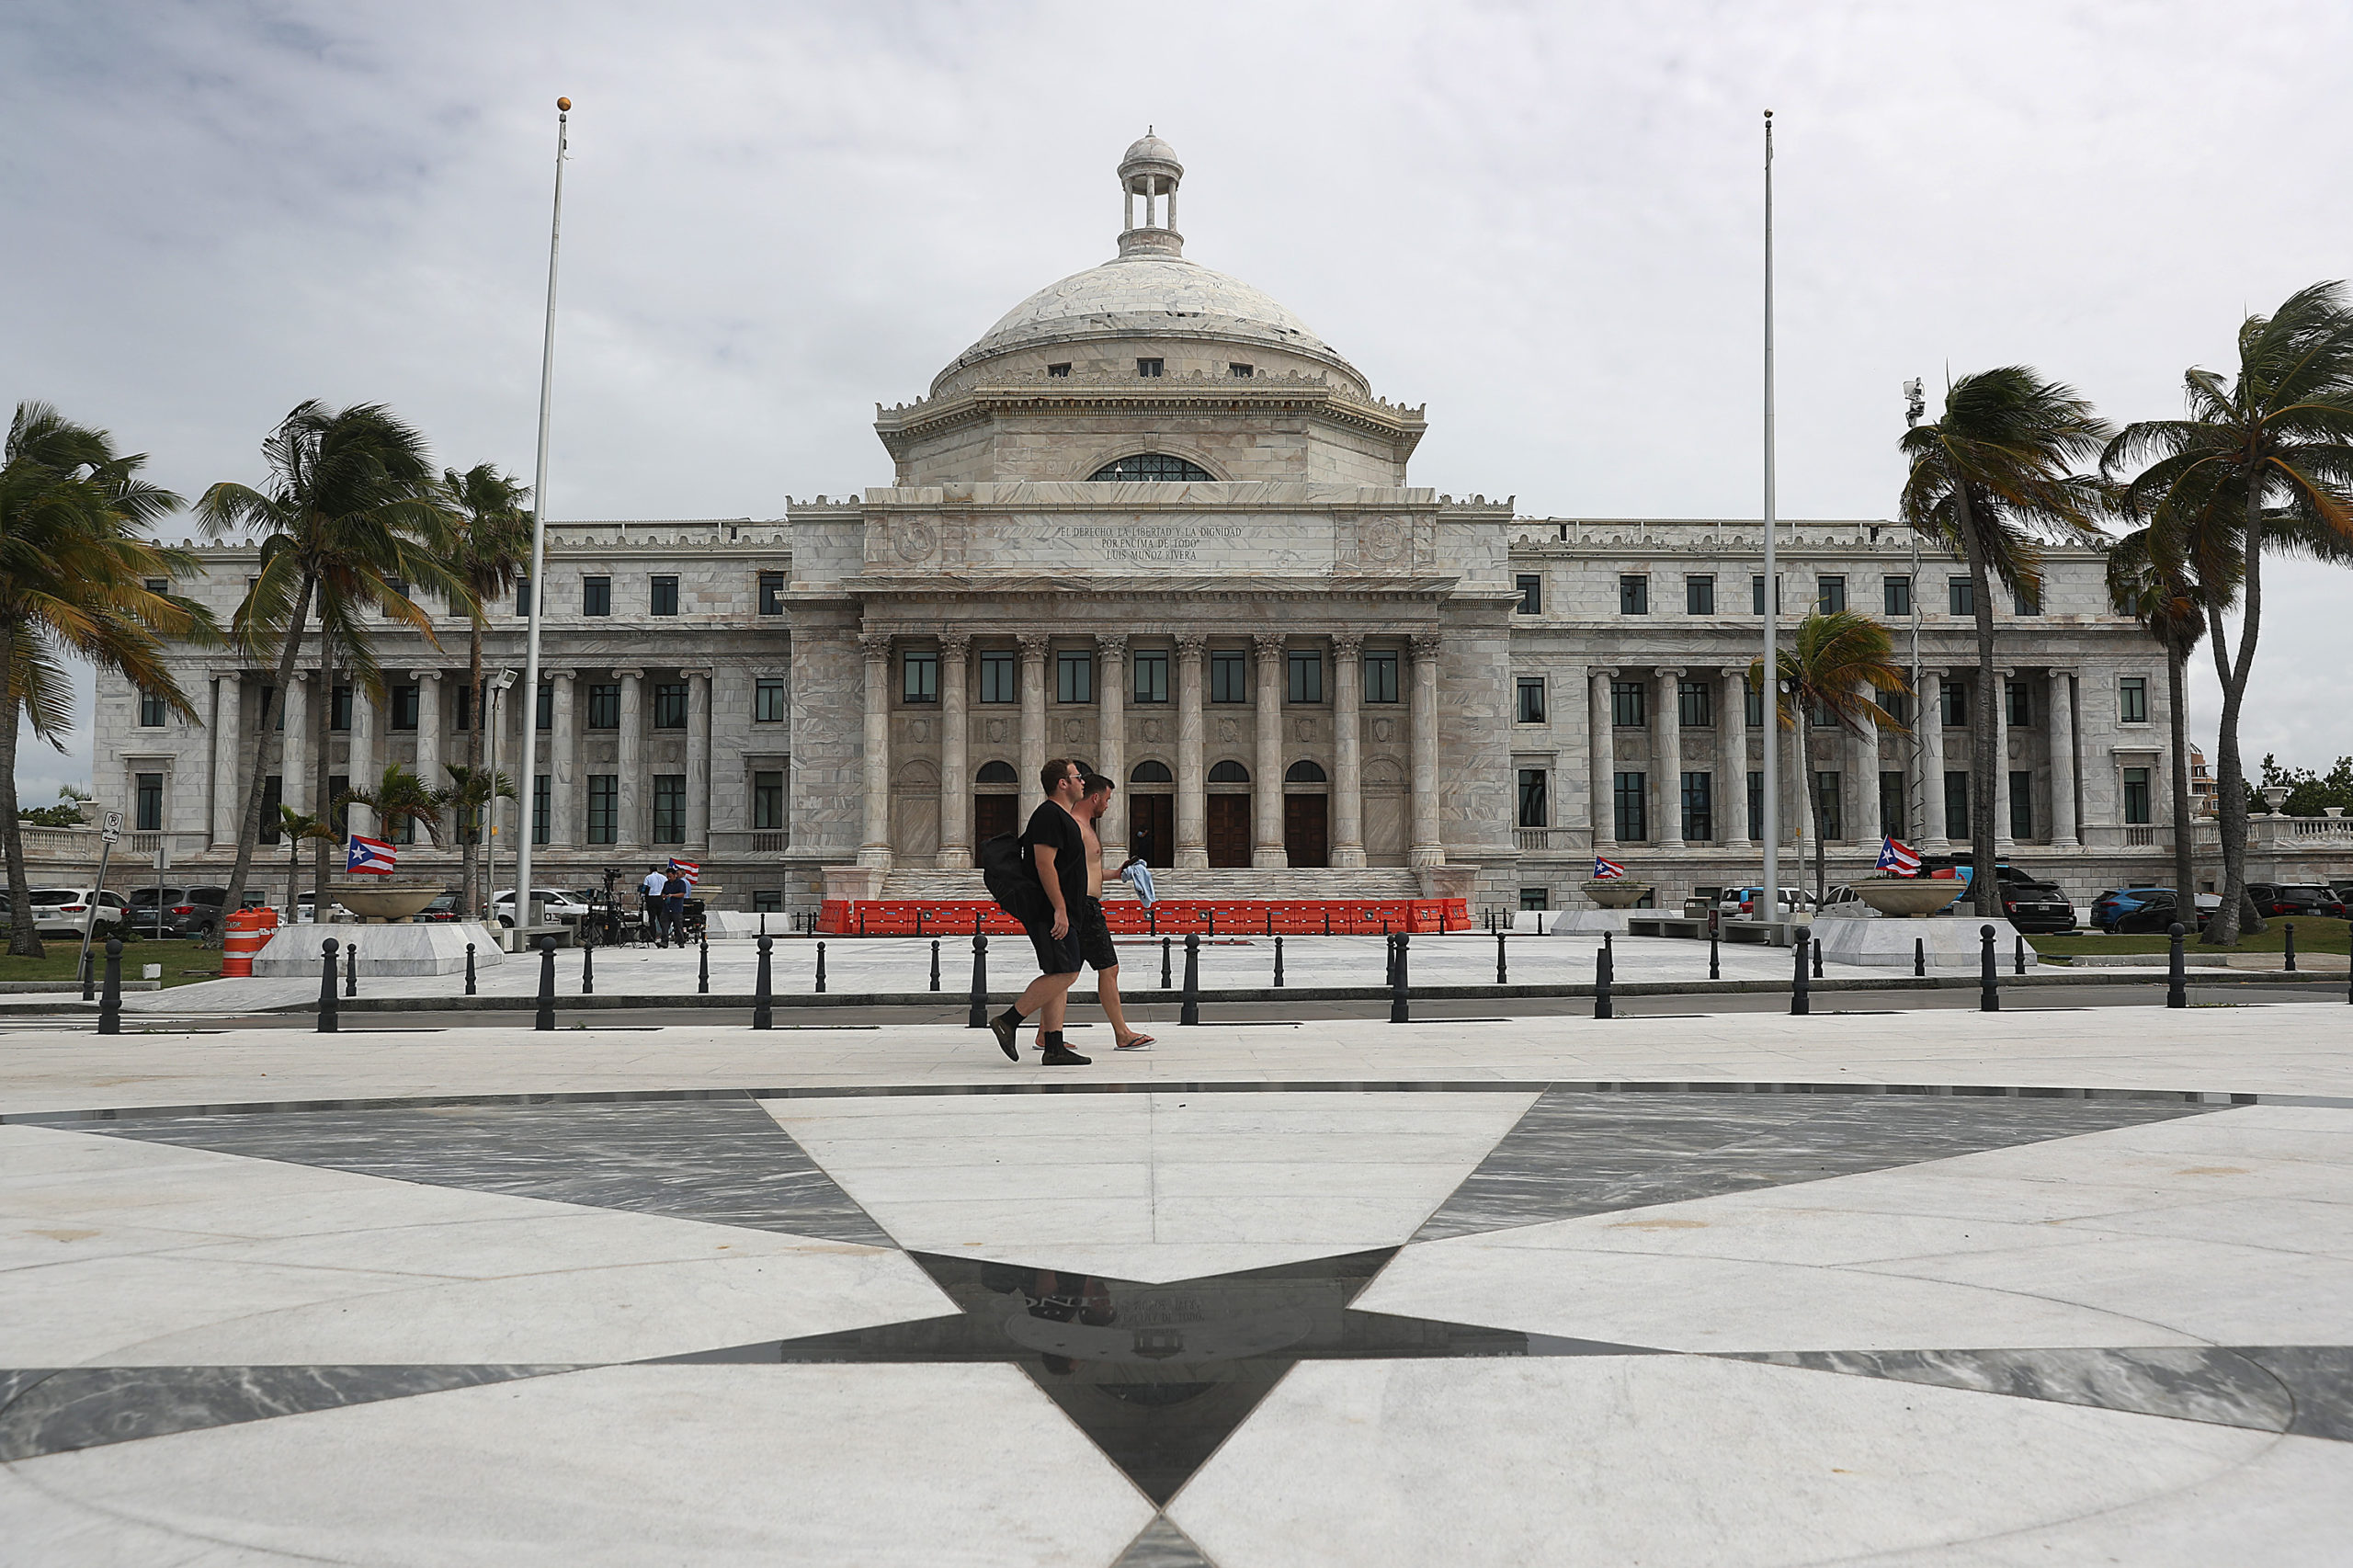 The Puerto Rican Capitol building is pictured in Old San Juan, Puerto Rico in 2019. (Joe Raedle/Getty Images)